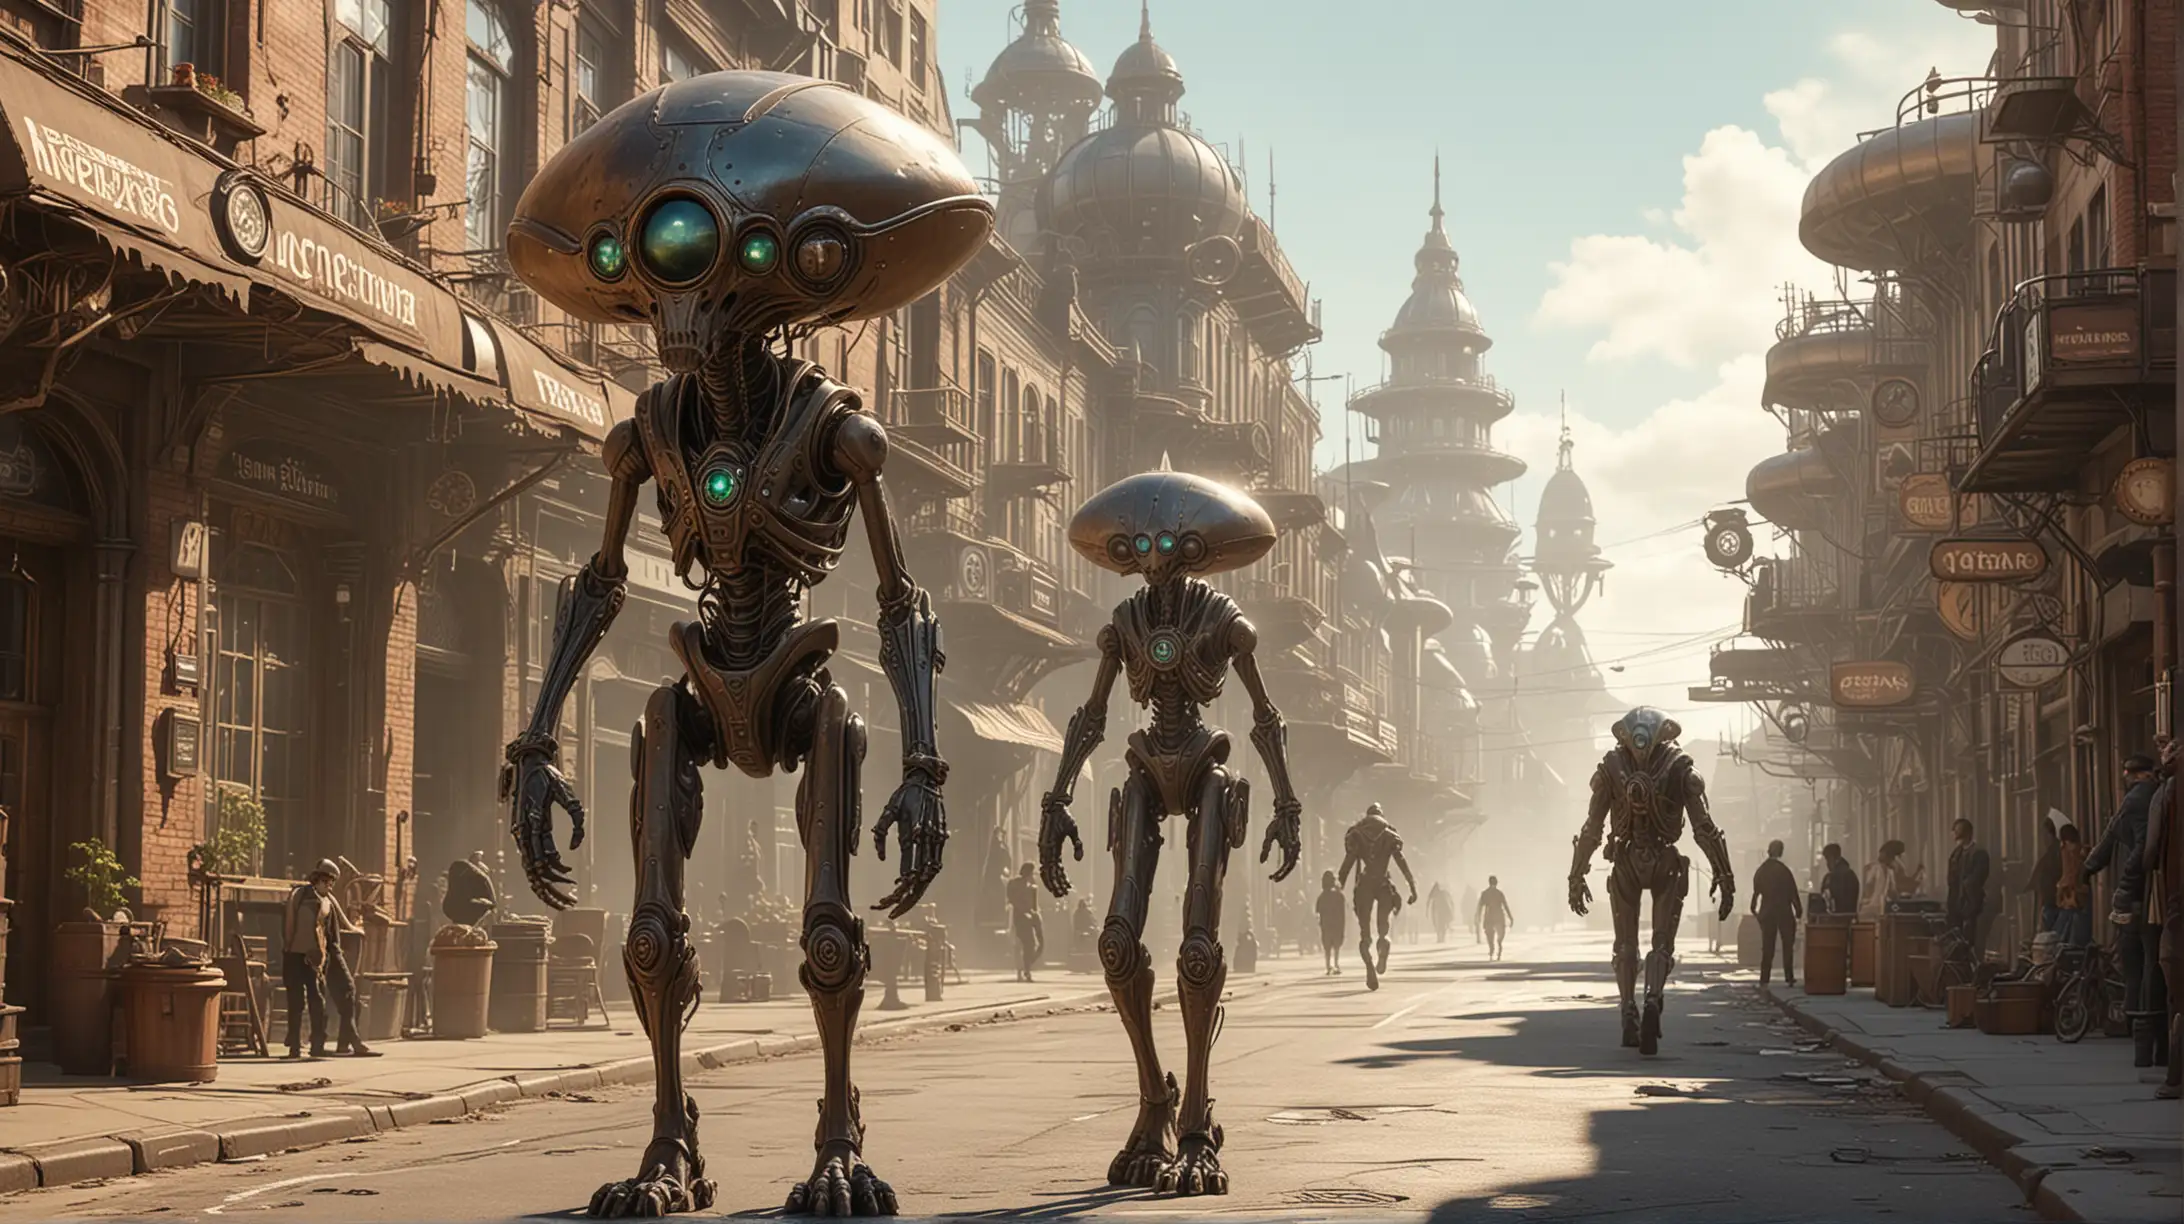 Alien Beings Strolling Through Sunny Steampunk City Streets